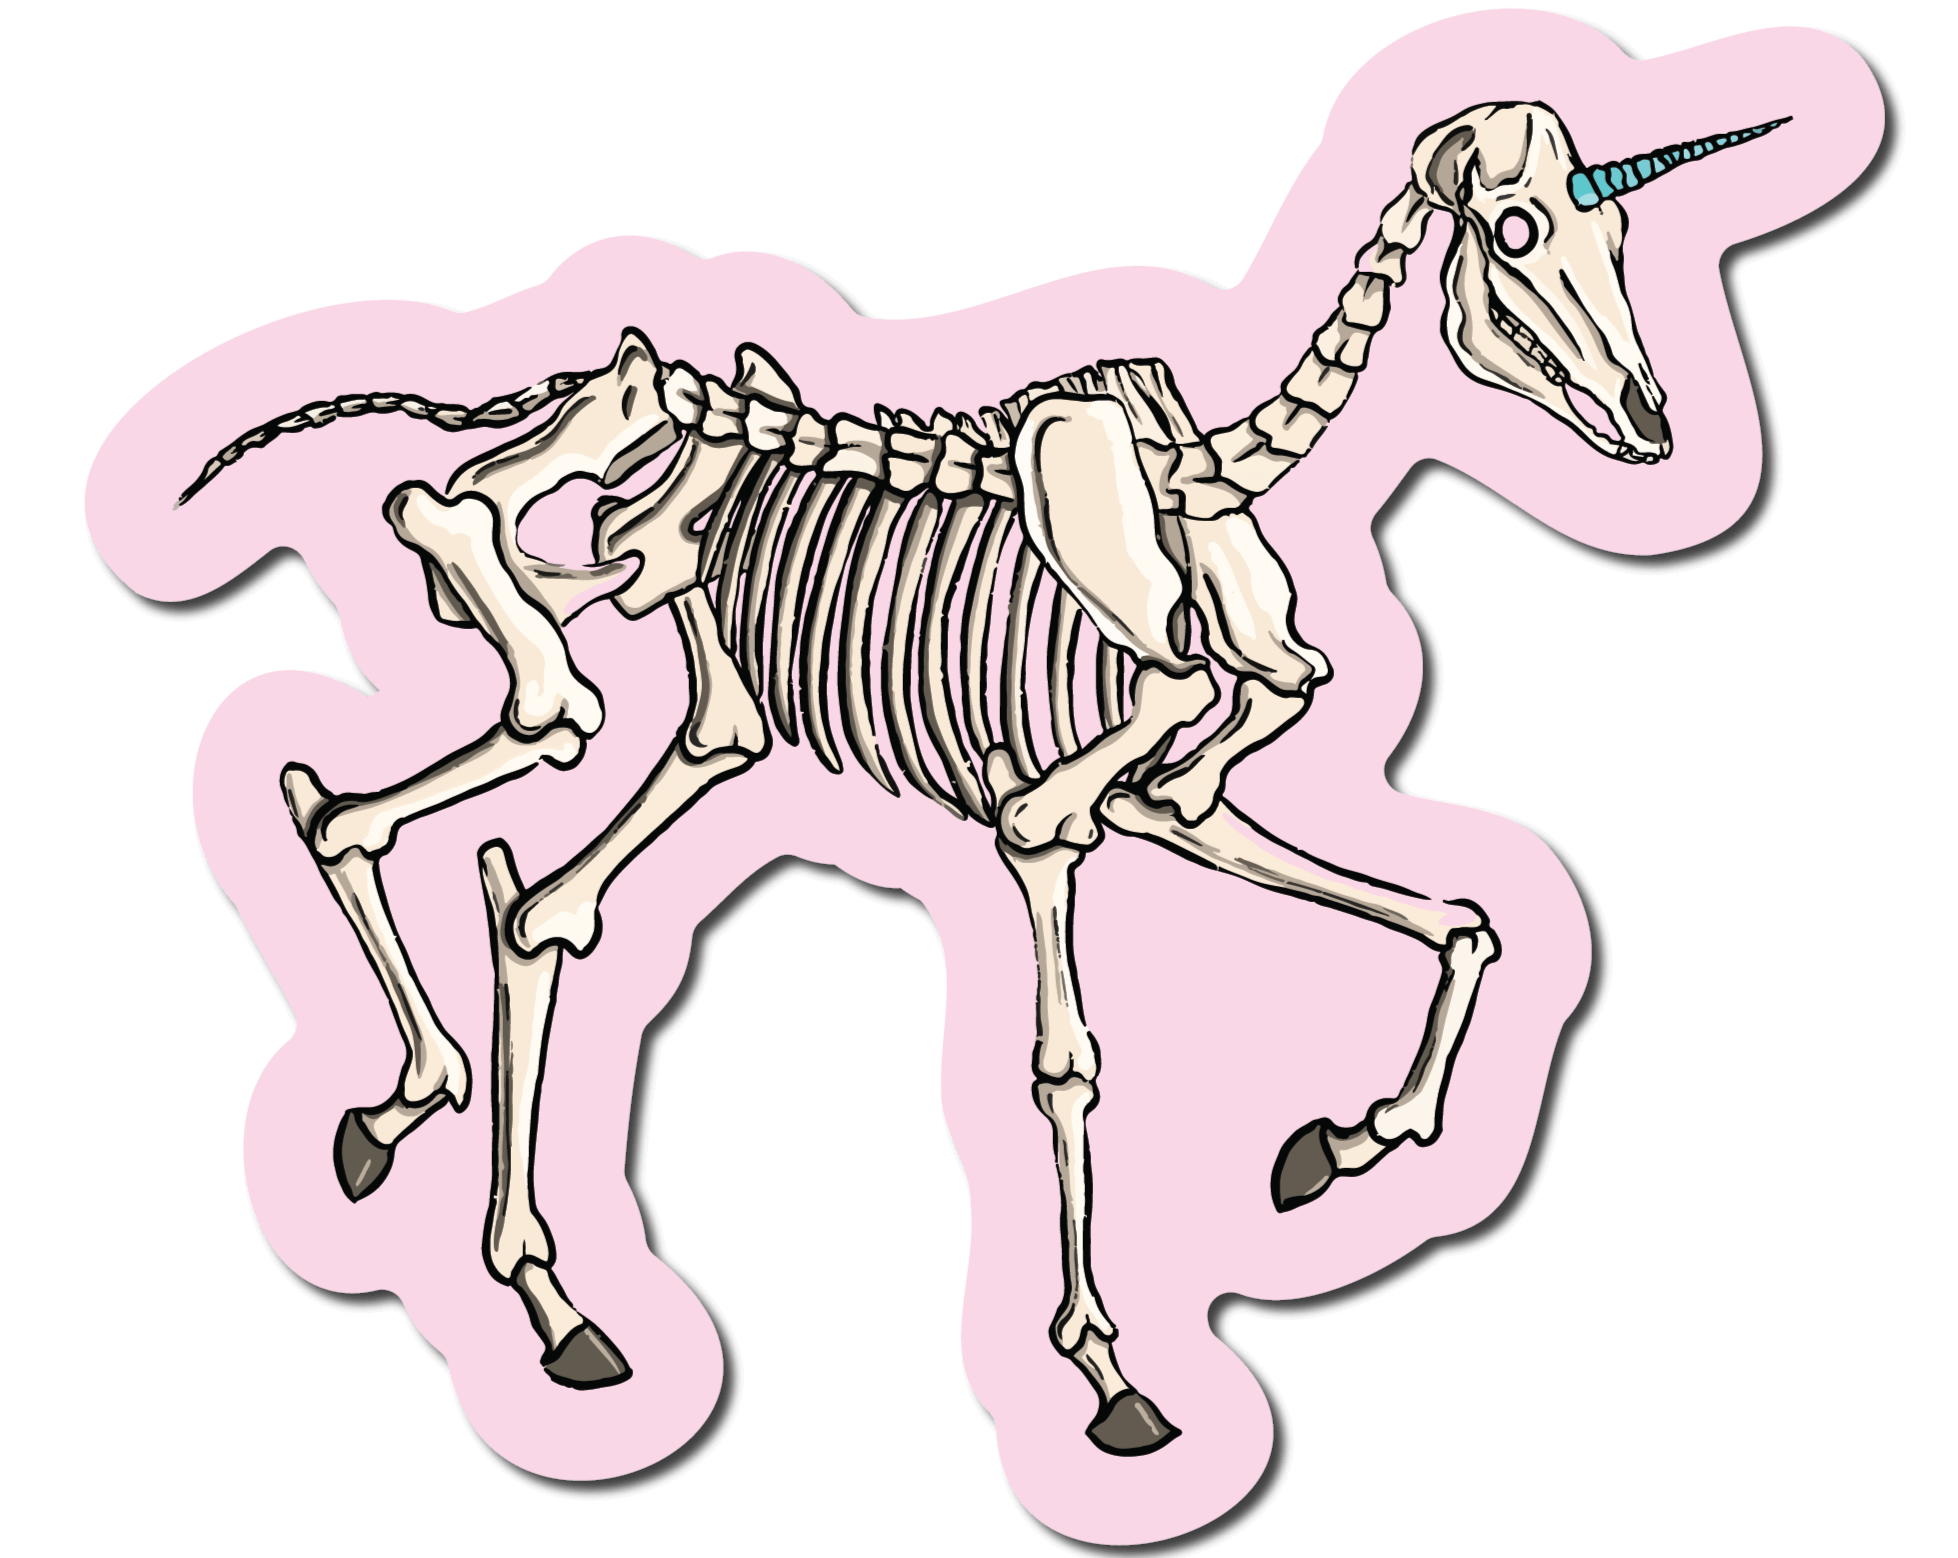 Small Sticker of a unicorn skeleton on a pink background